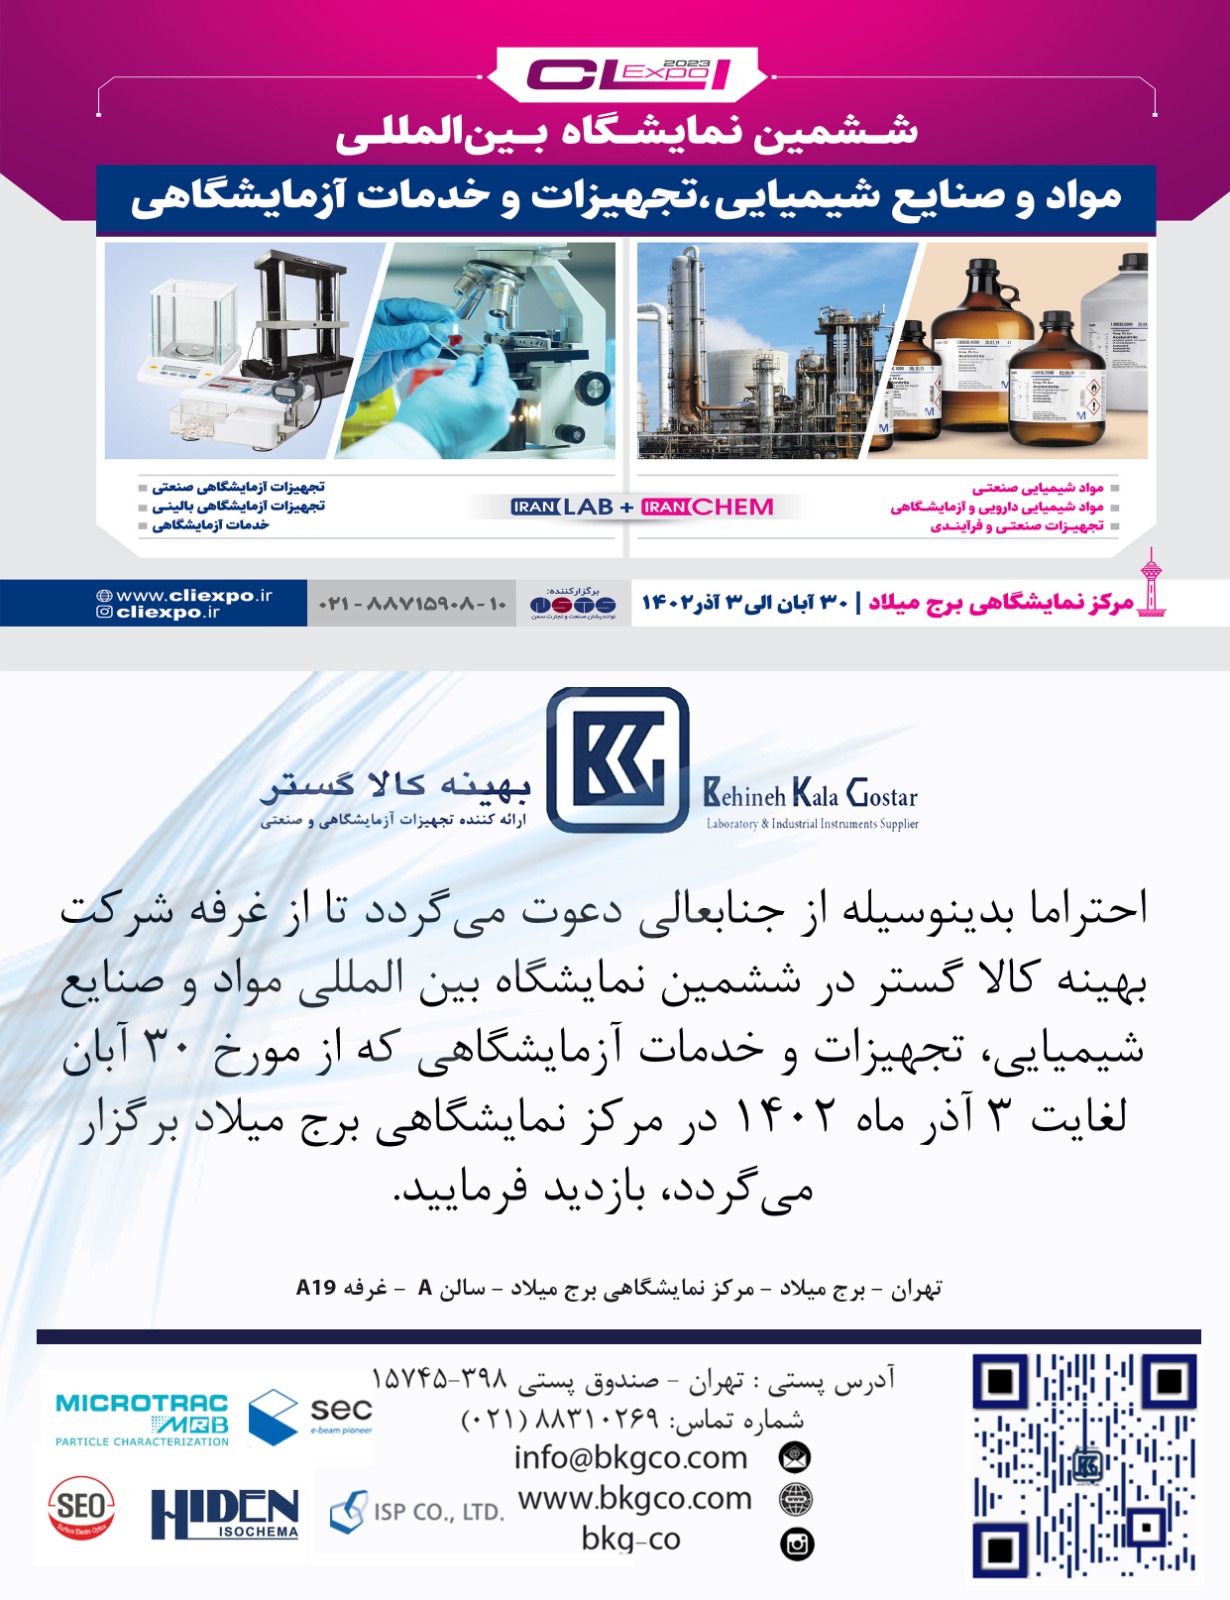 The 6th international exhibition of materials and chemical industries